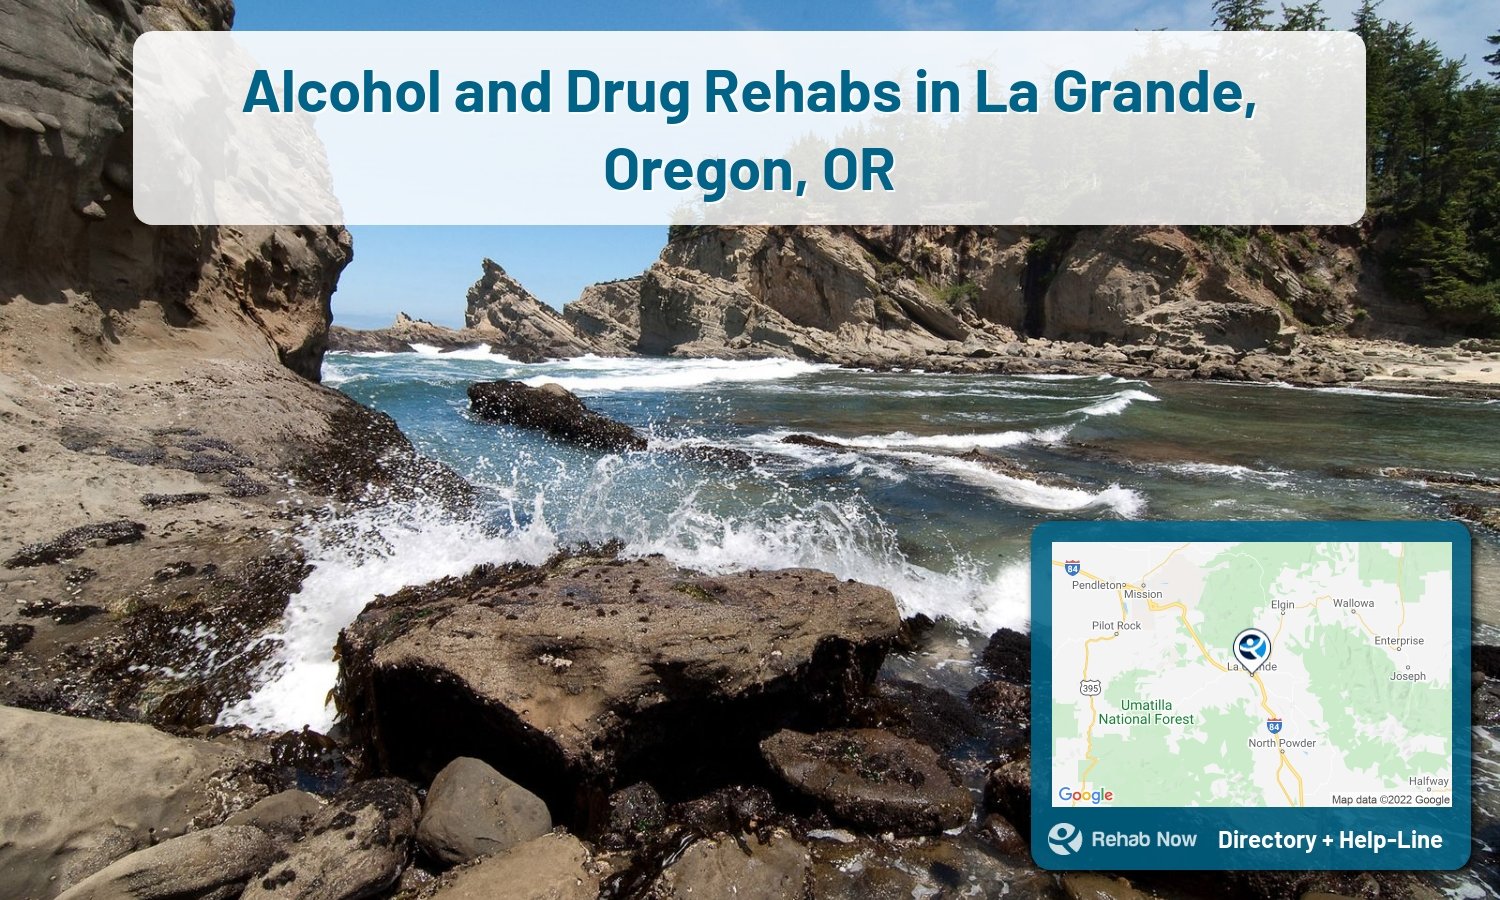 Ready to pick a rehab center in La Grande? Get off alcohol, opiates, and other drugs, by selecting top drug rehab centers in Oregon